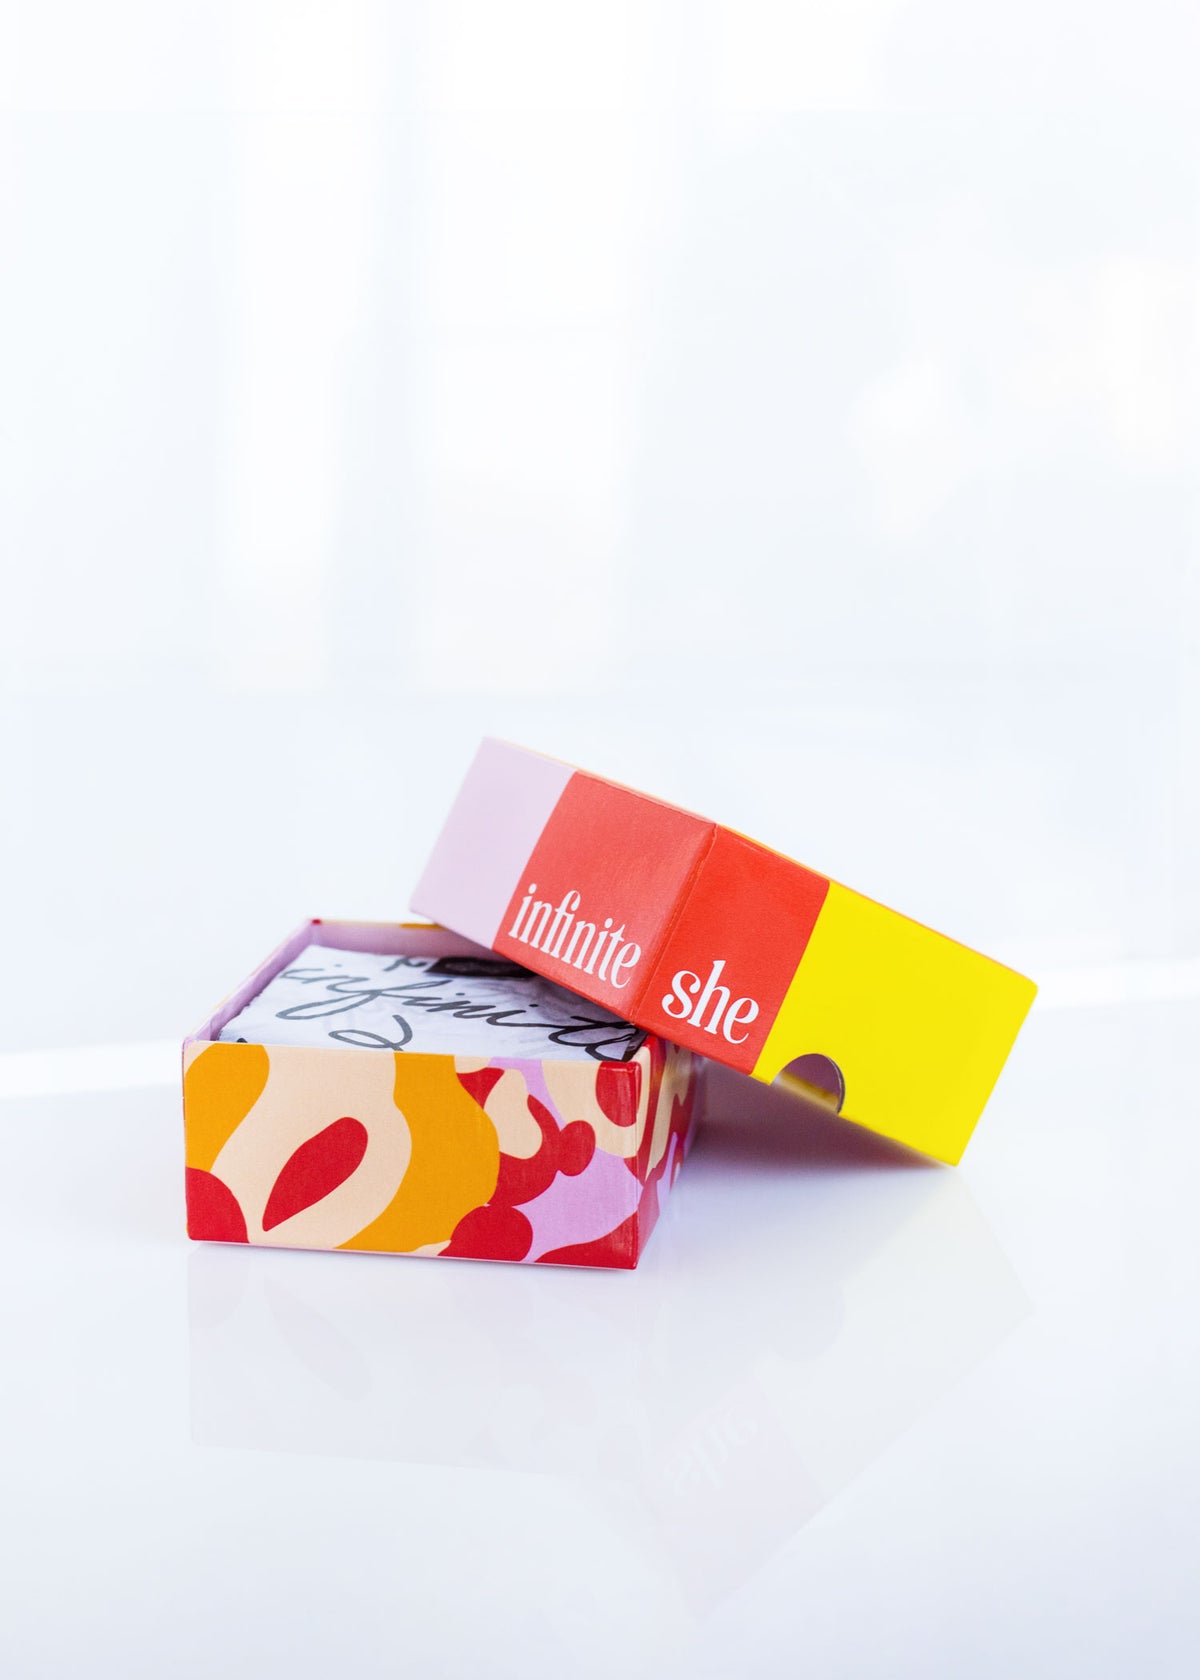 A colorful Margot Elena product box with the words "Infinite She Change the Game Shea Butter Soap" on a vibrant red label, partially opened to reveal a Shea Butter soap patterned interior, set against a bright, light background.